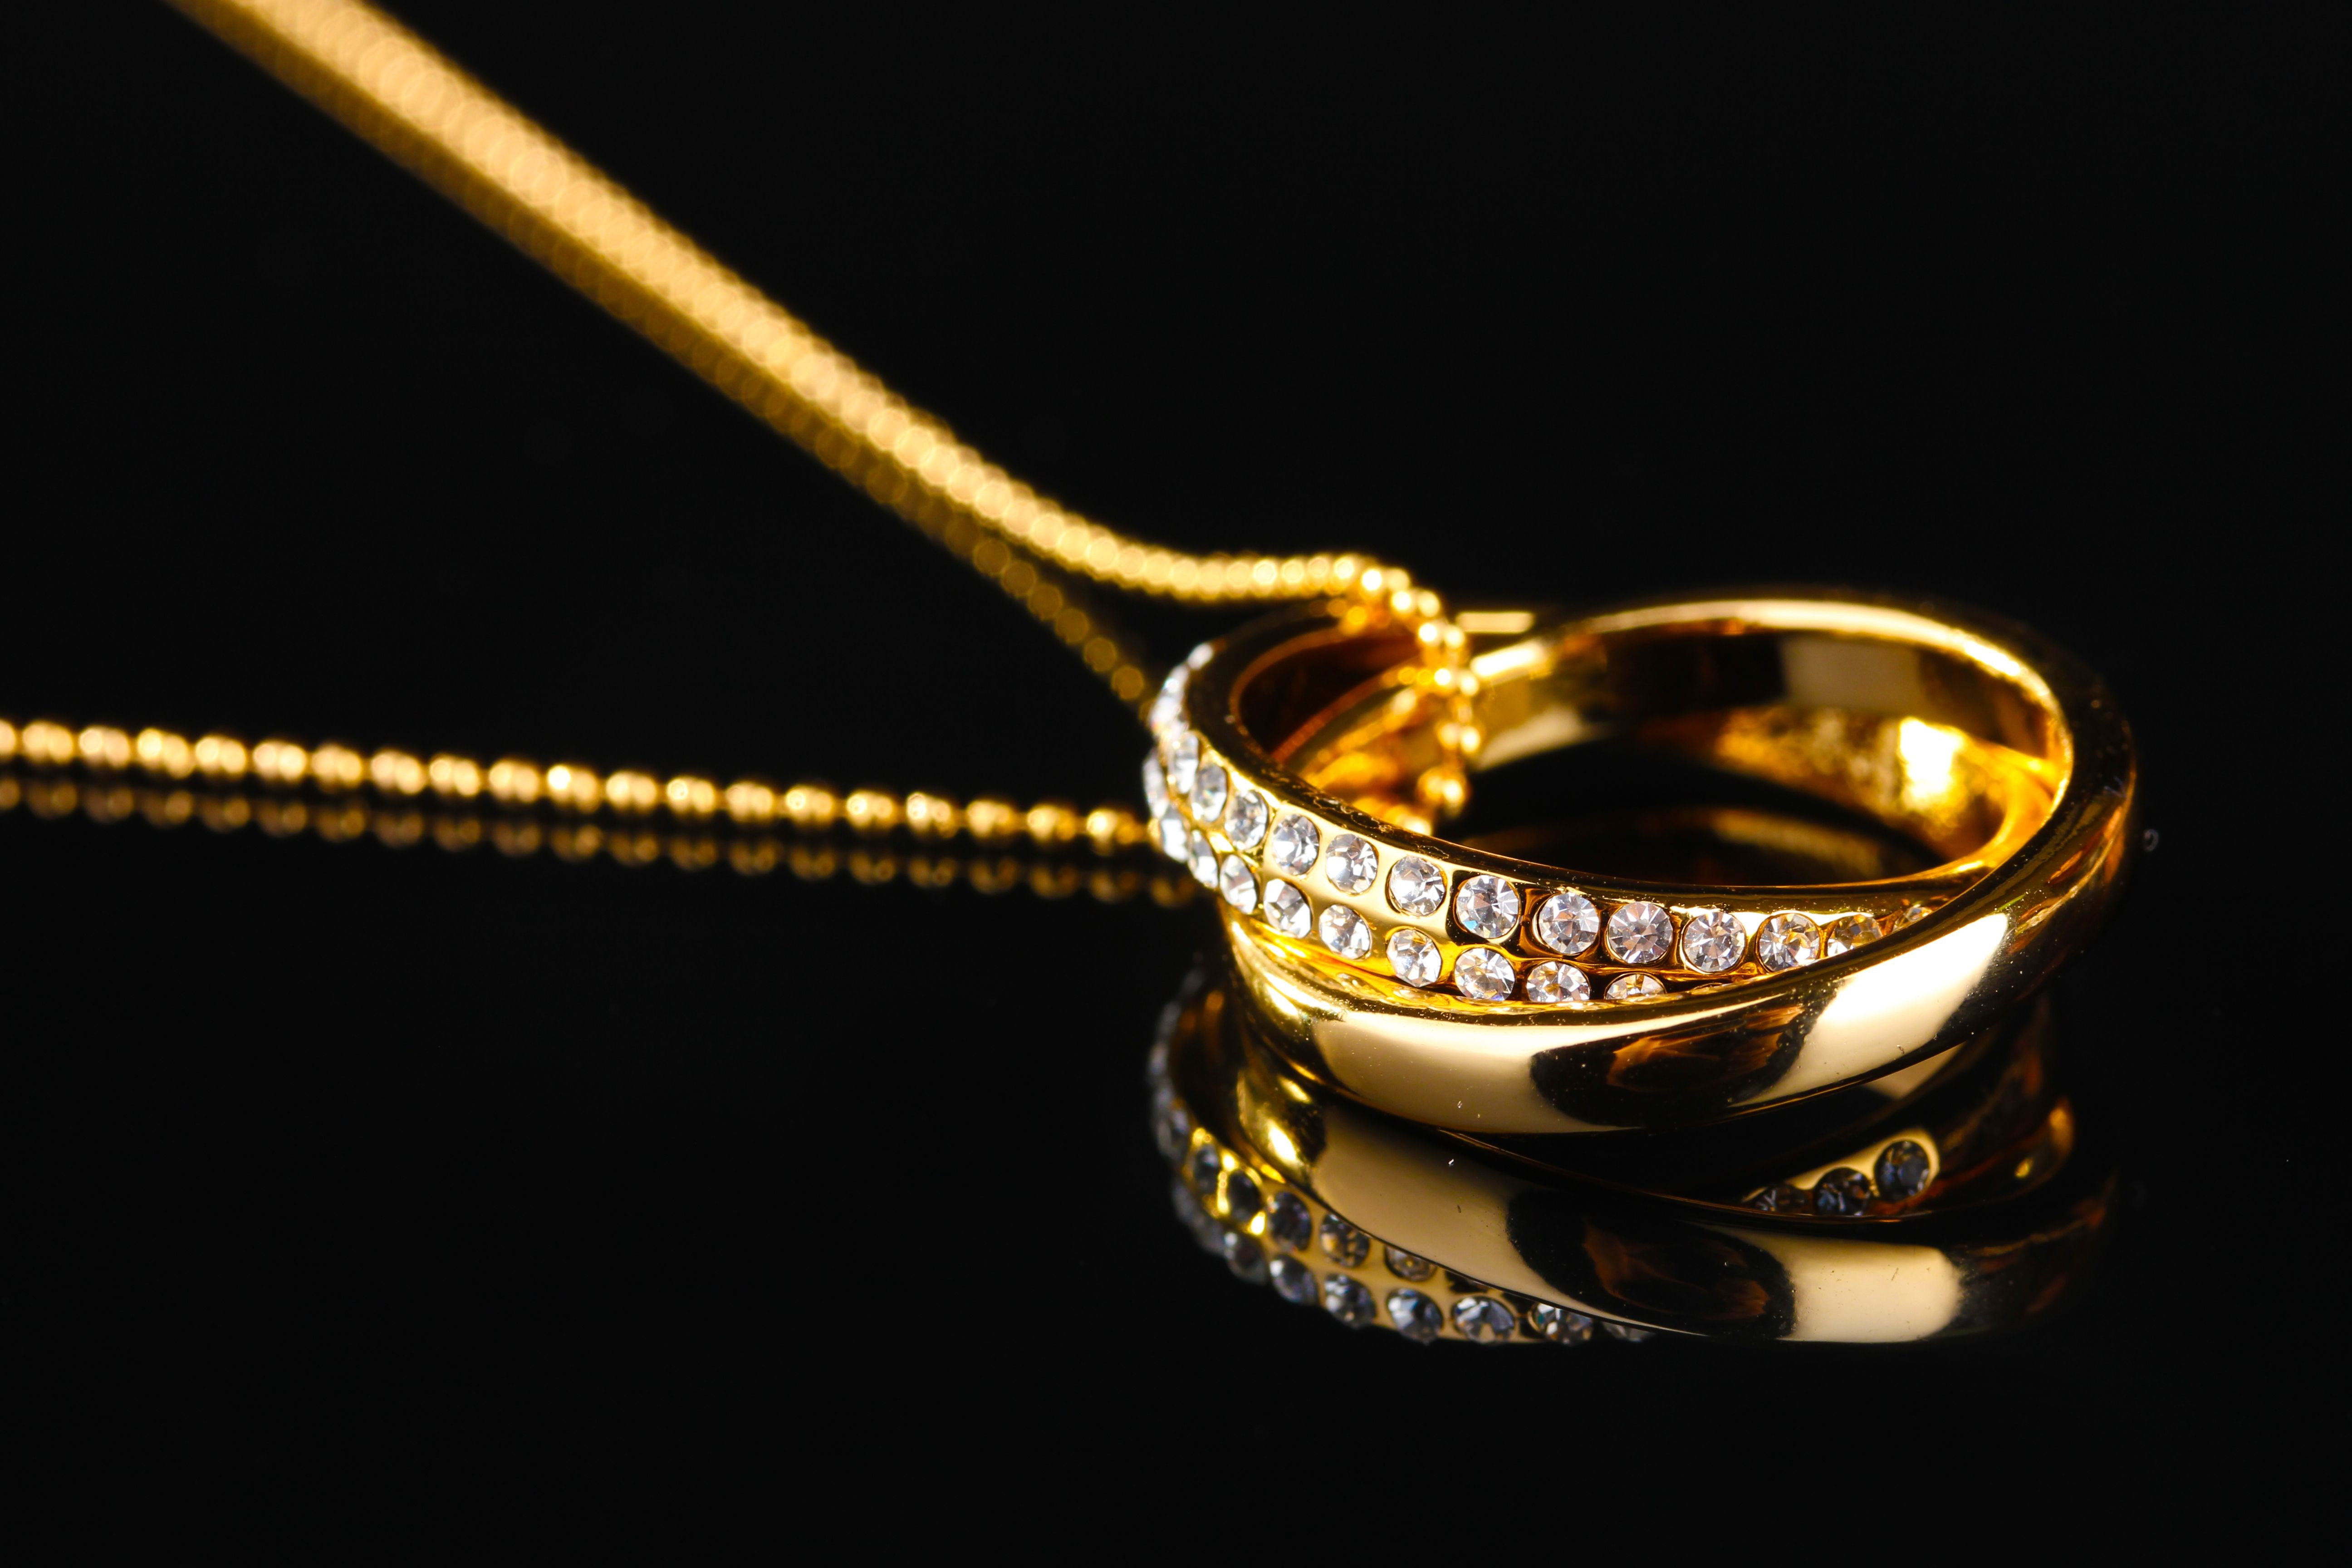 Gold Ring Jewelry On A Chain .wallpapertip.com